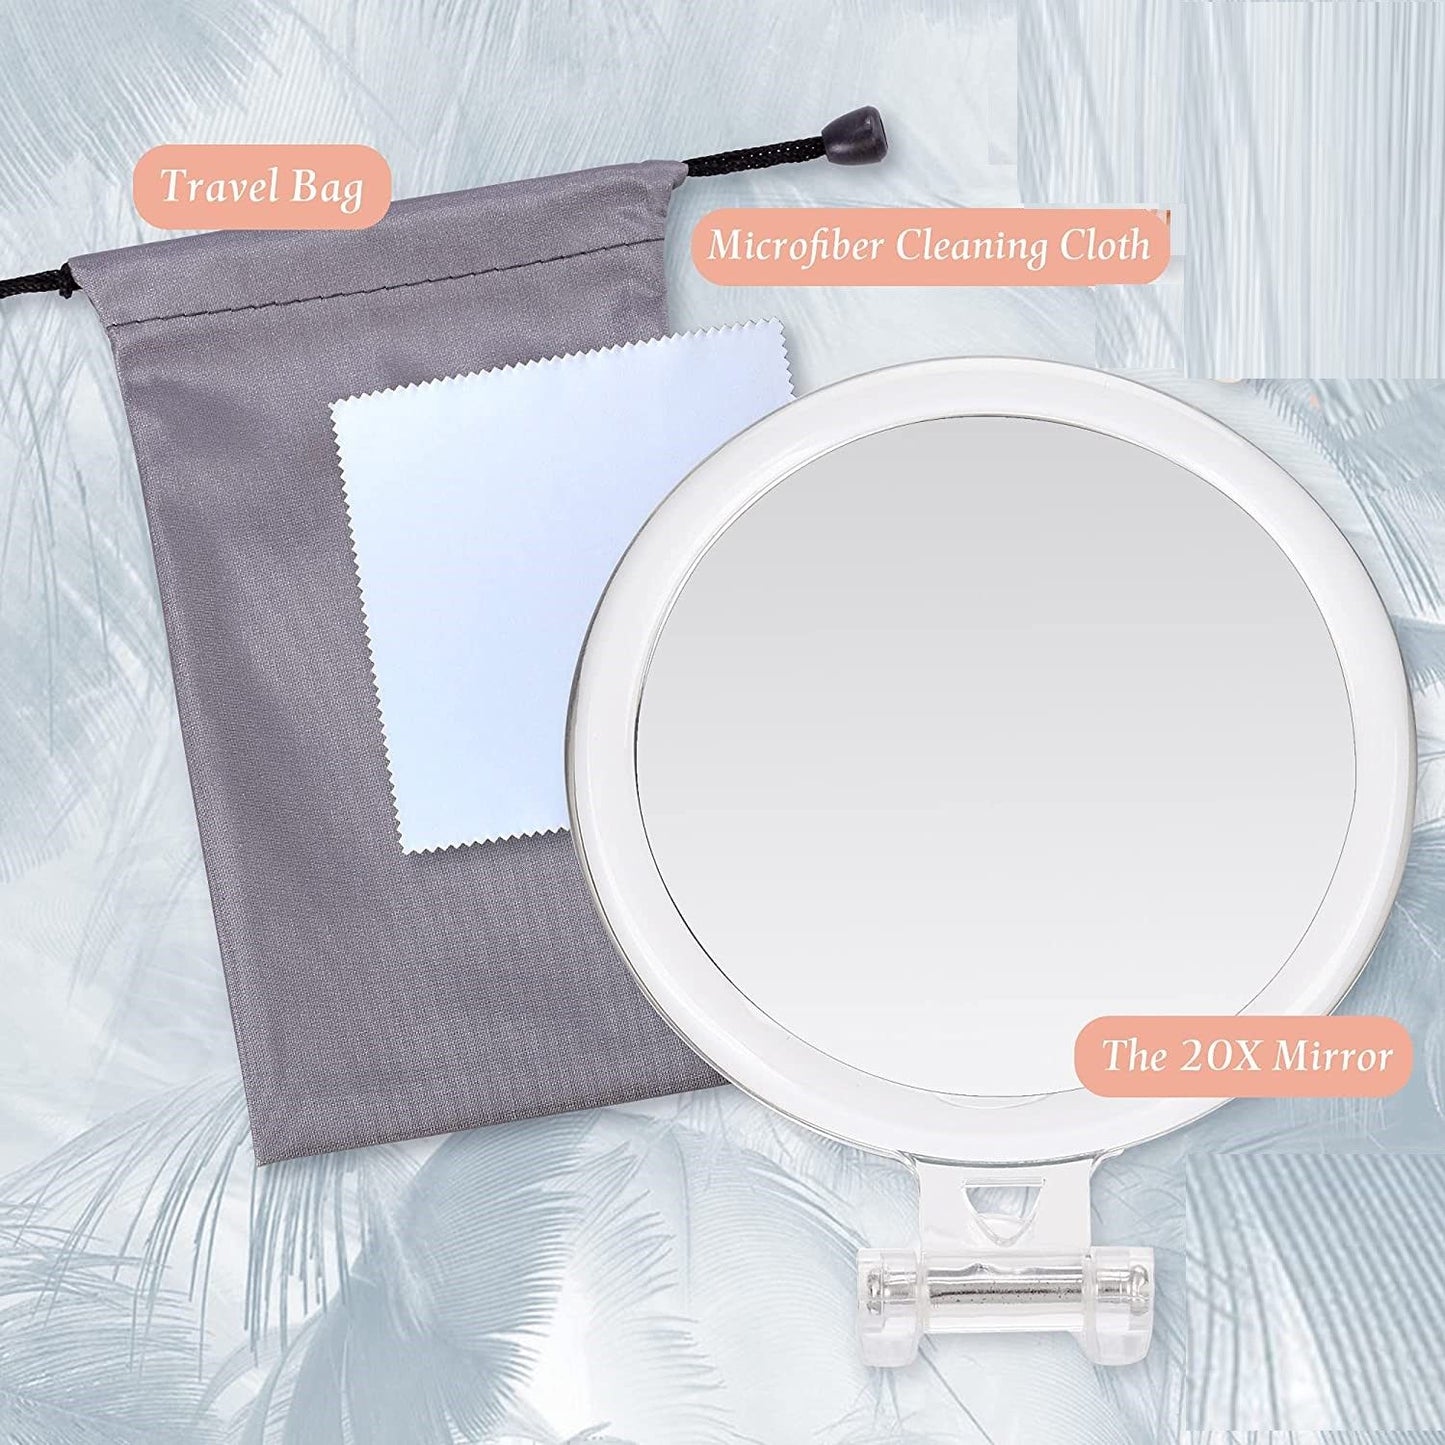 20X Magnifying Hand Mirror Two Sided Use for Makeup Application, Tweezing, and Blackhead/Blemish Removal (15 cm) - image2